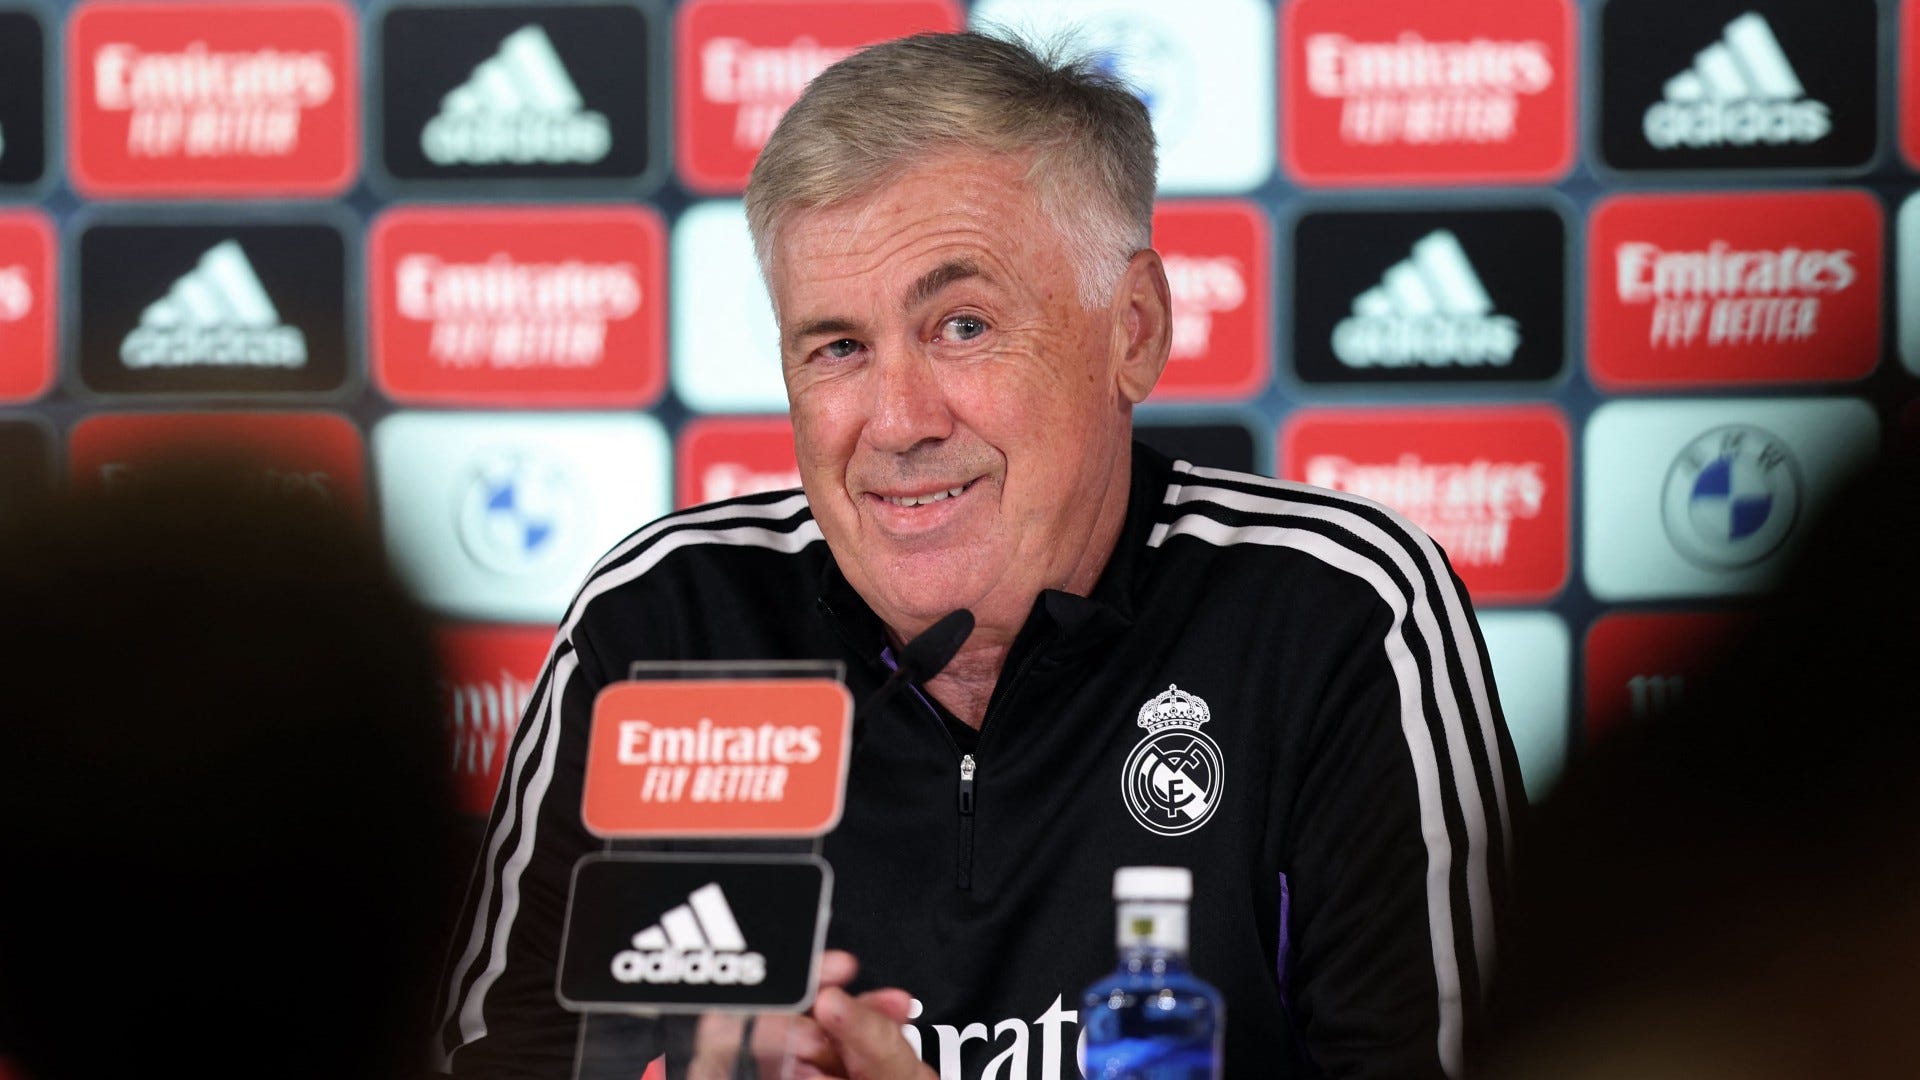 'Lets go for 200!' - Real Madrid boss Ancelotti reacts to equalling Sir Alex Ferguson's all-time Champions ... - Goal.com